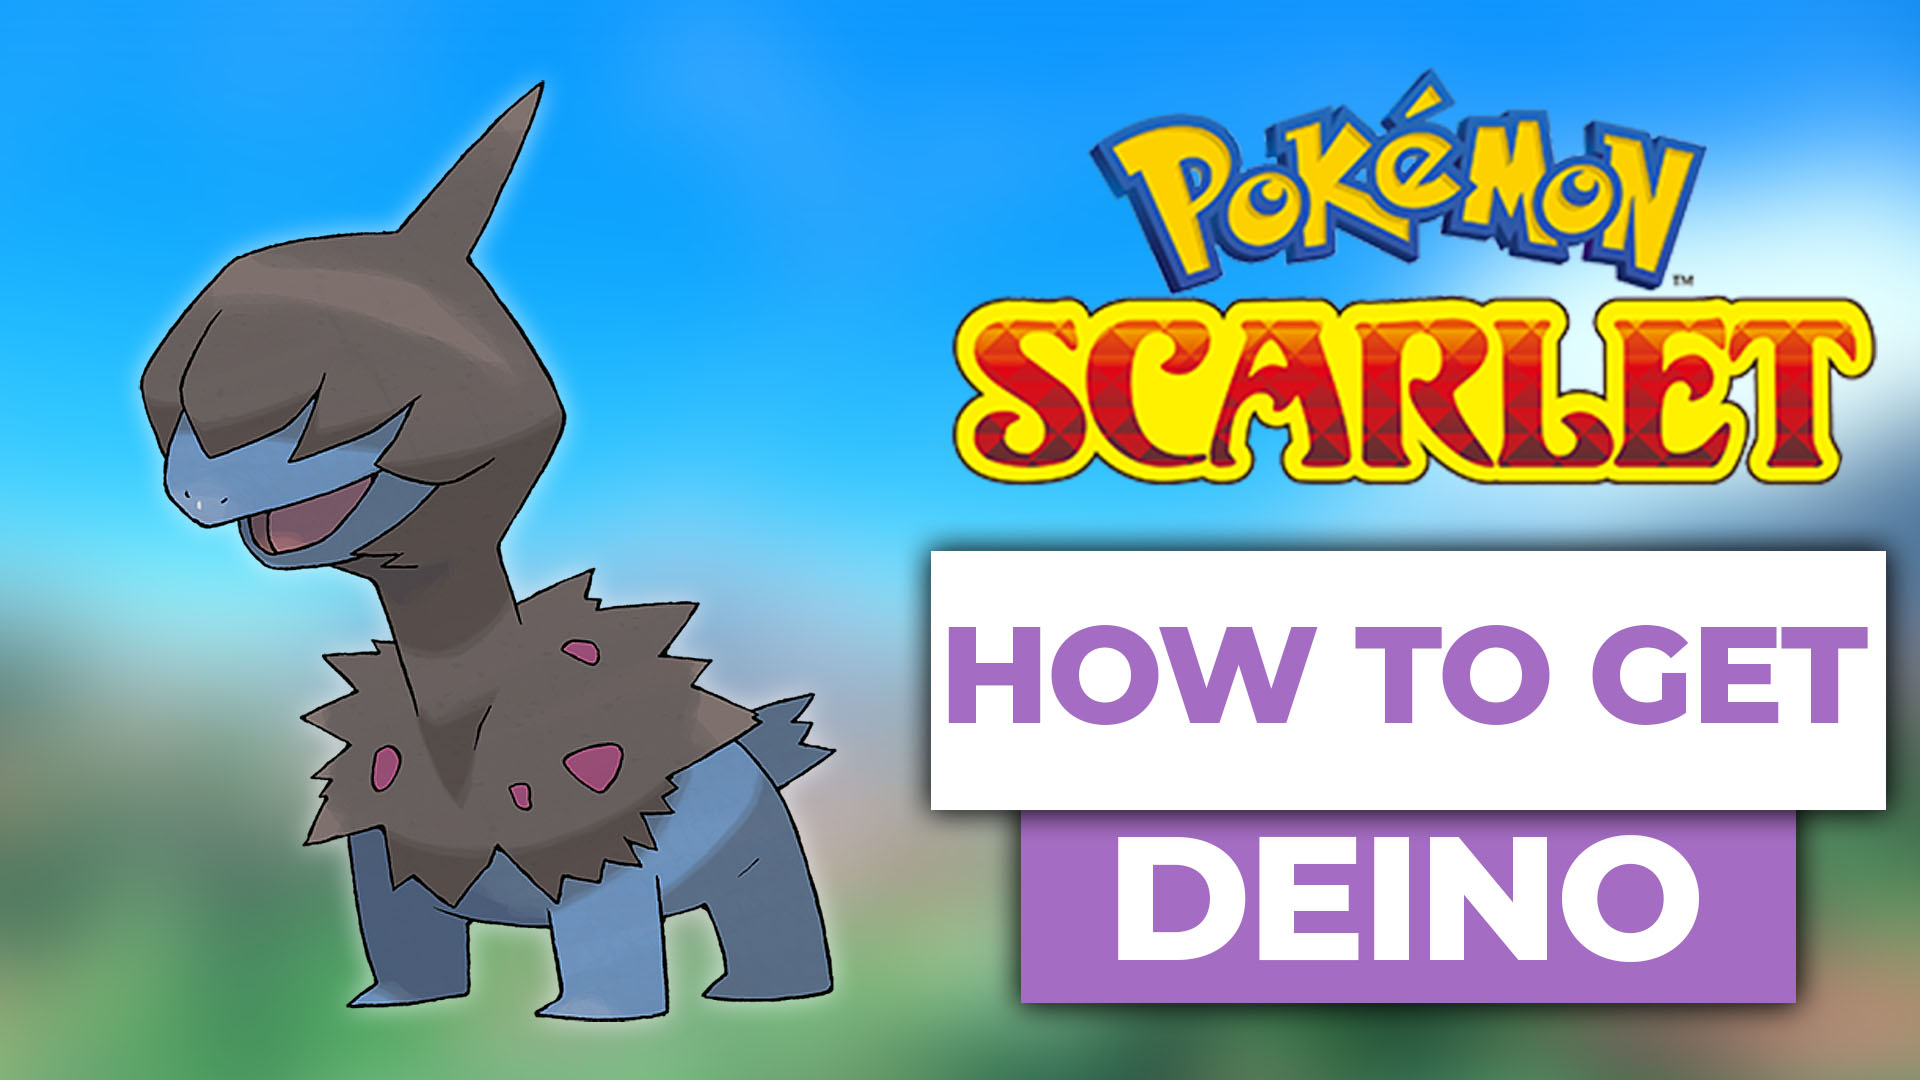 How To Get Deino In Pokemon Scarlet (The Easy Way)